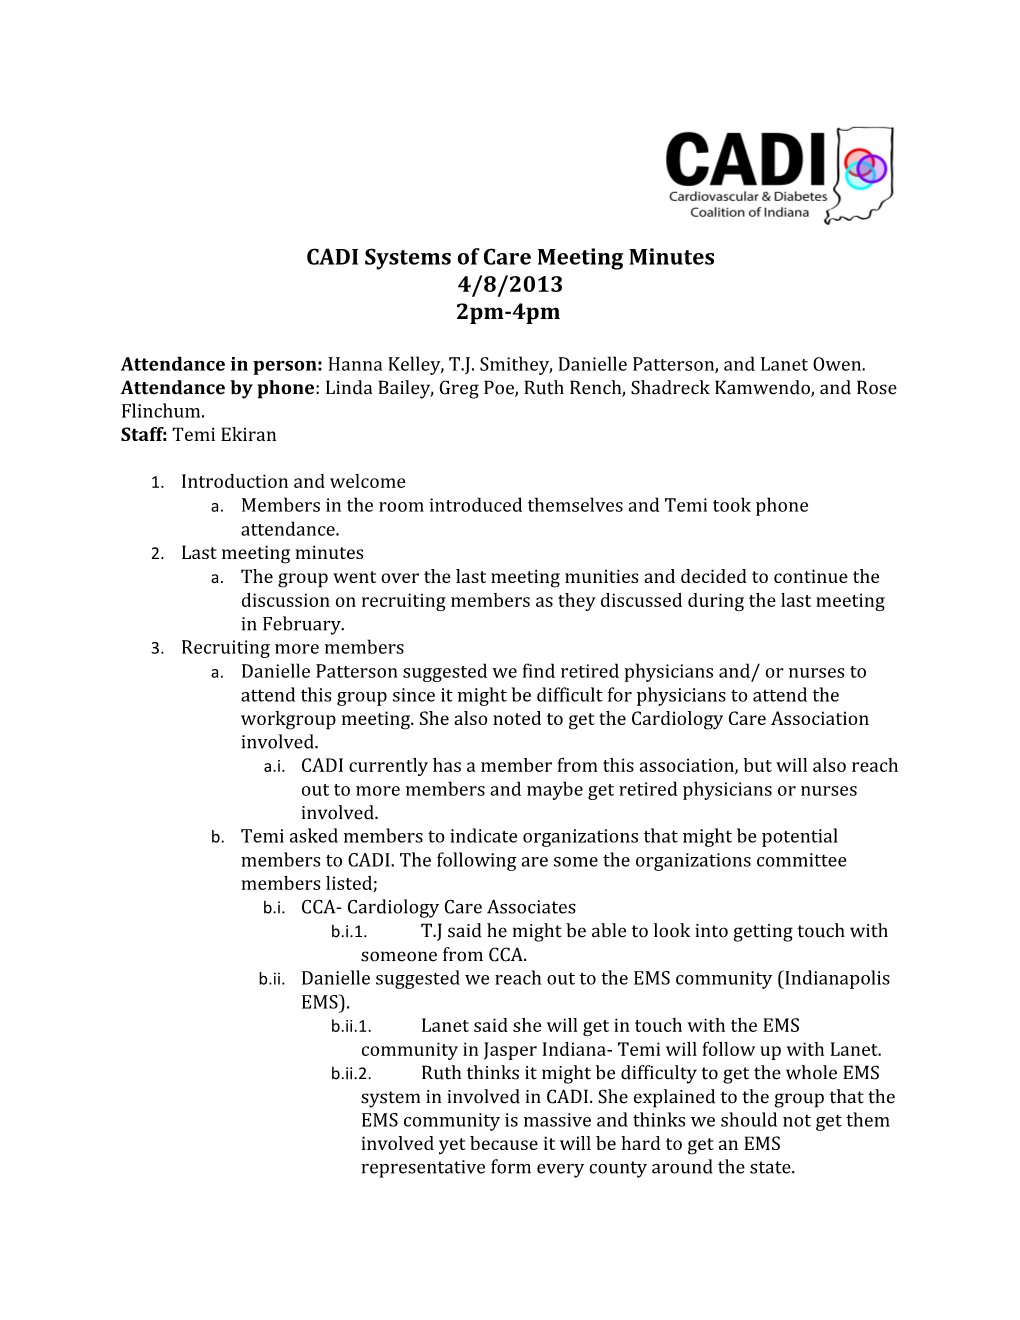 CADI Systems of Care Meeting Minutes